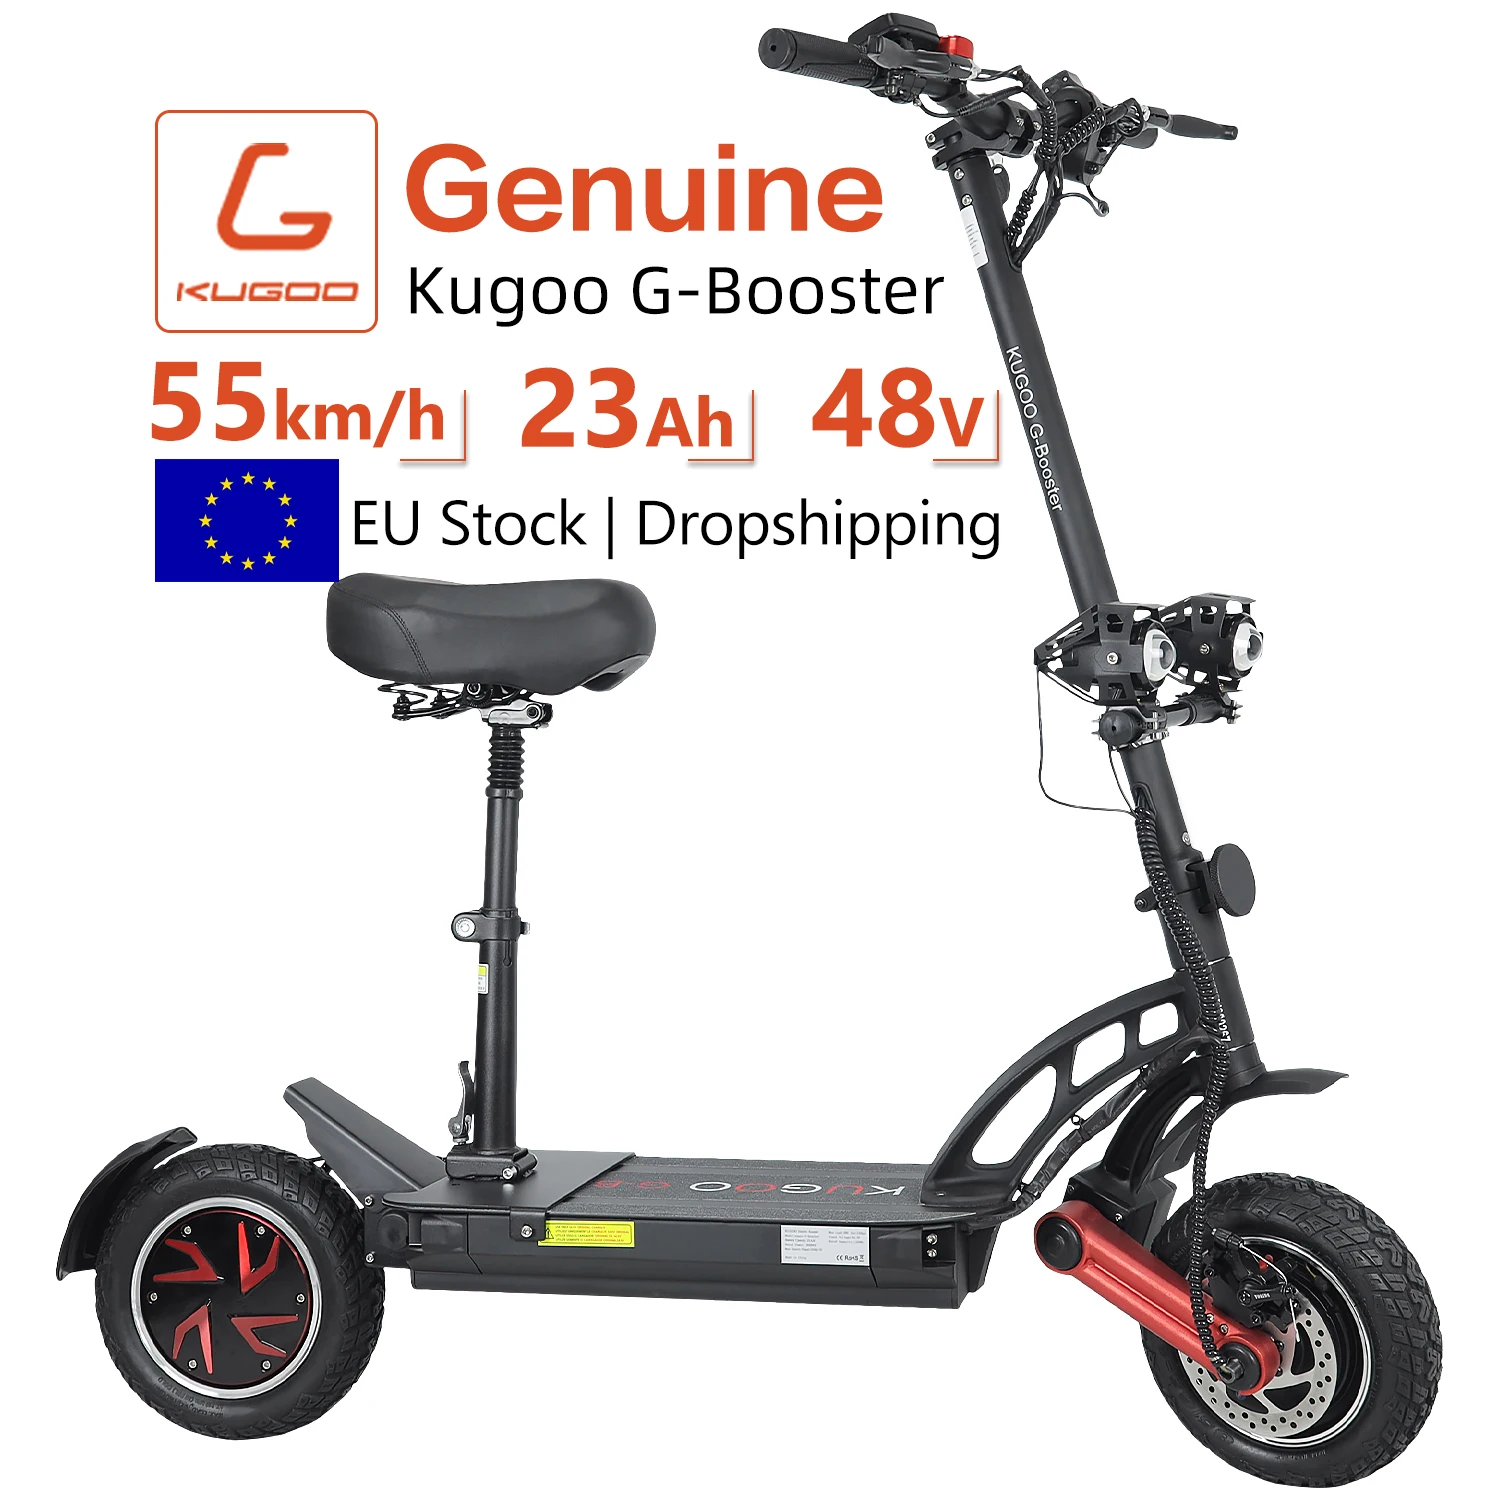 

Wholesale kugoo G-Booster 23ah 48v powerful daul motor 800w*2 Portable Fast Folding Adult Electric Scooters